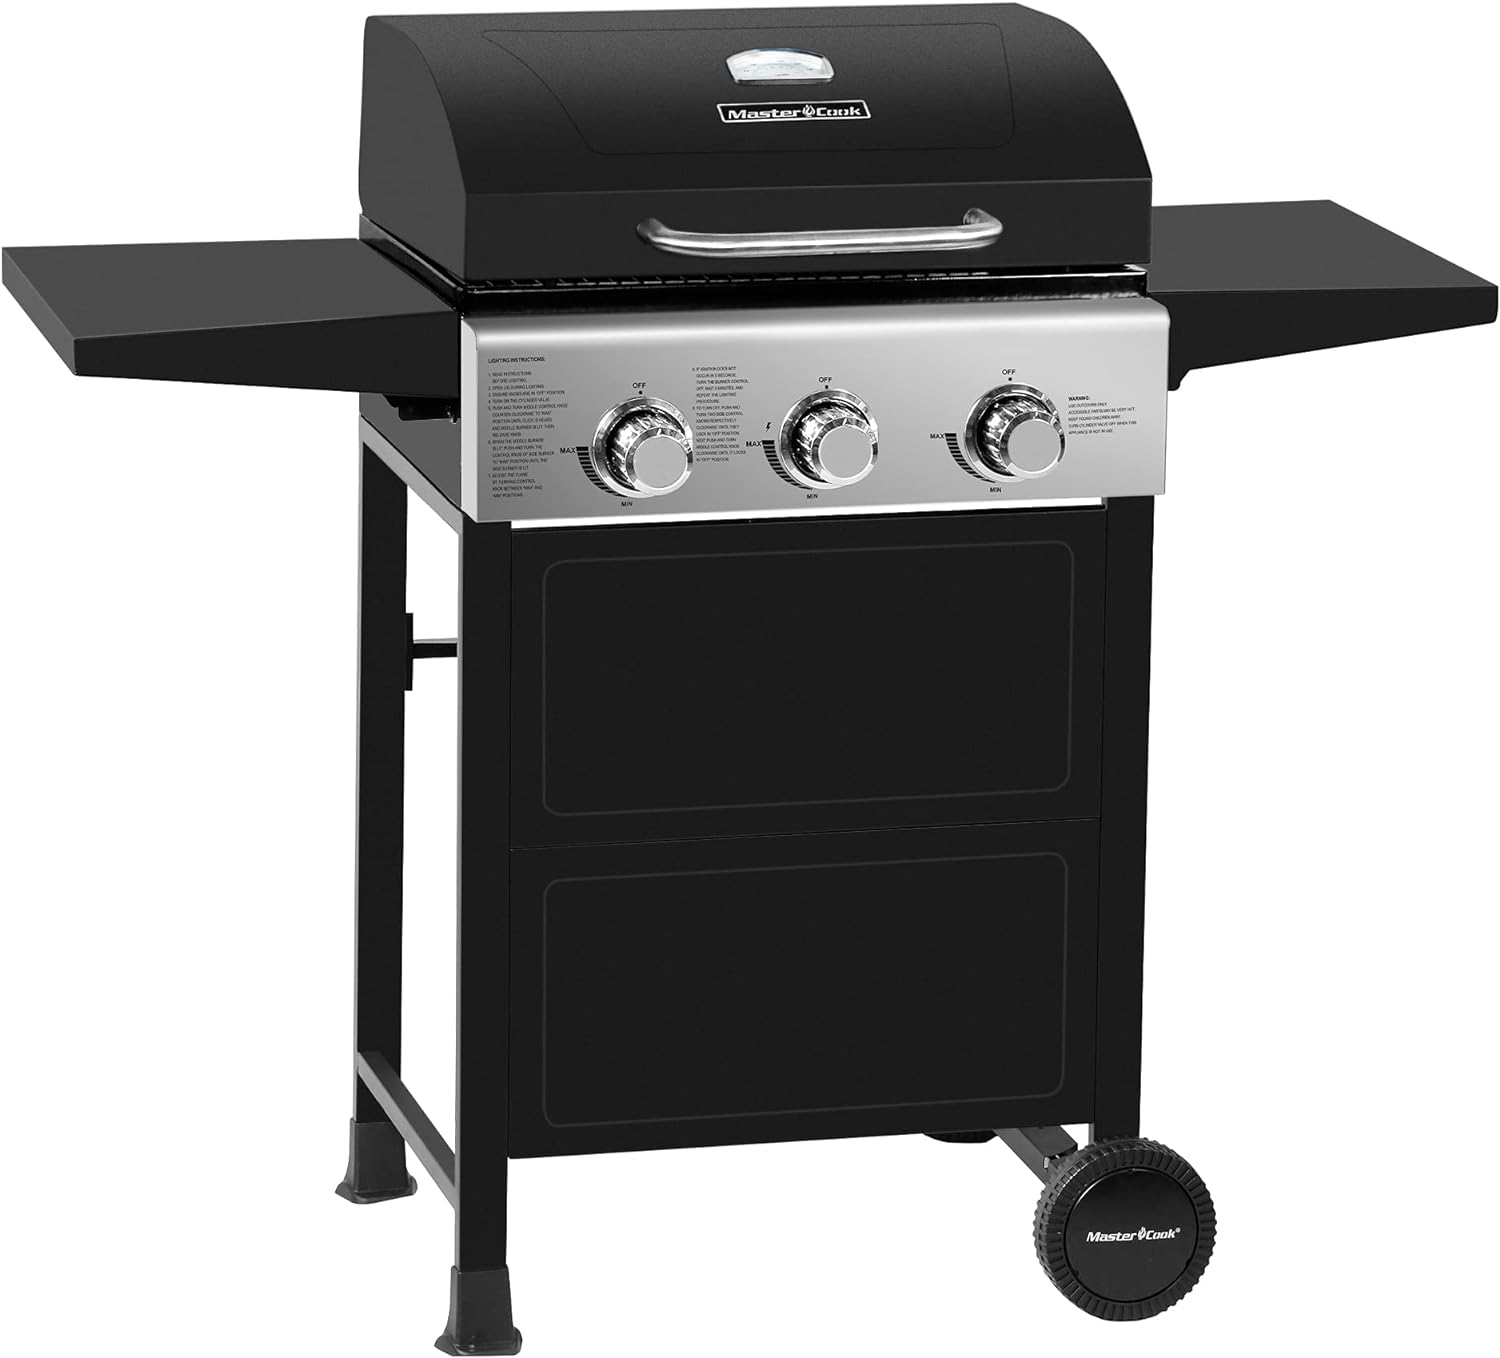 MASTER COOK Classic Liquid Propane Gas Grill, 3 Burner with Folding Table